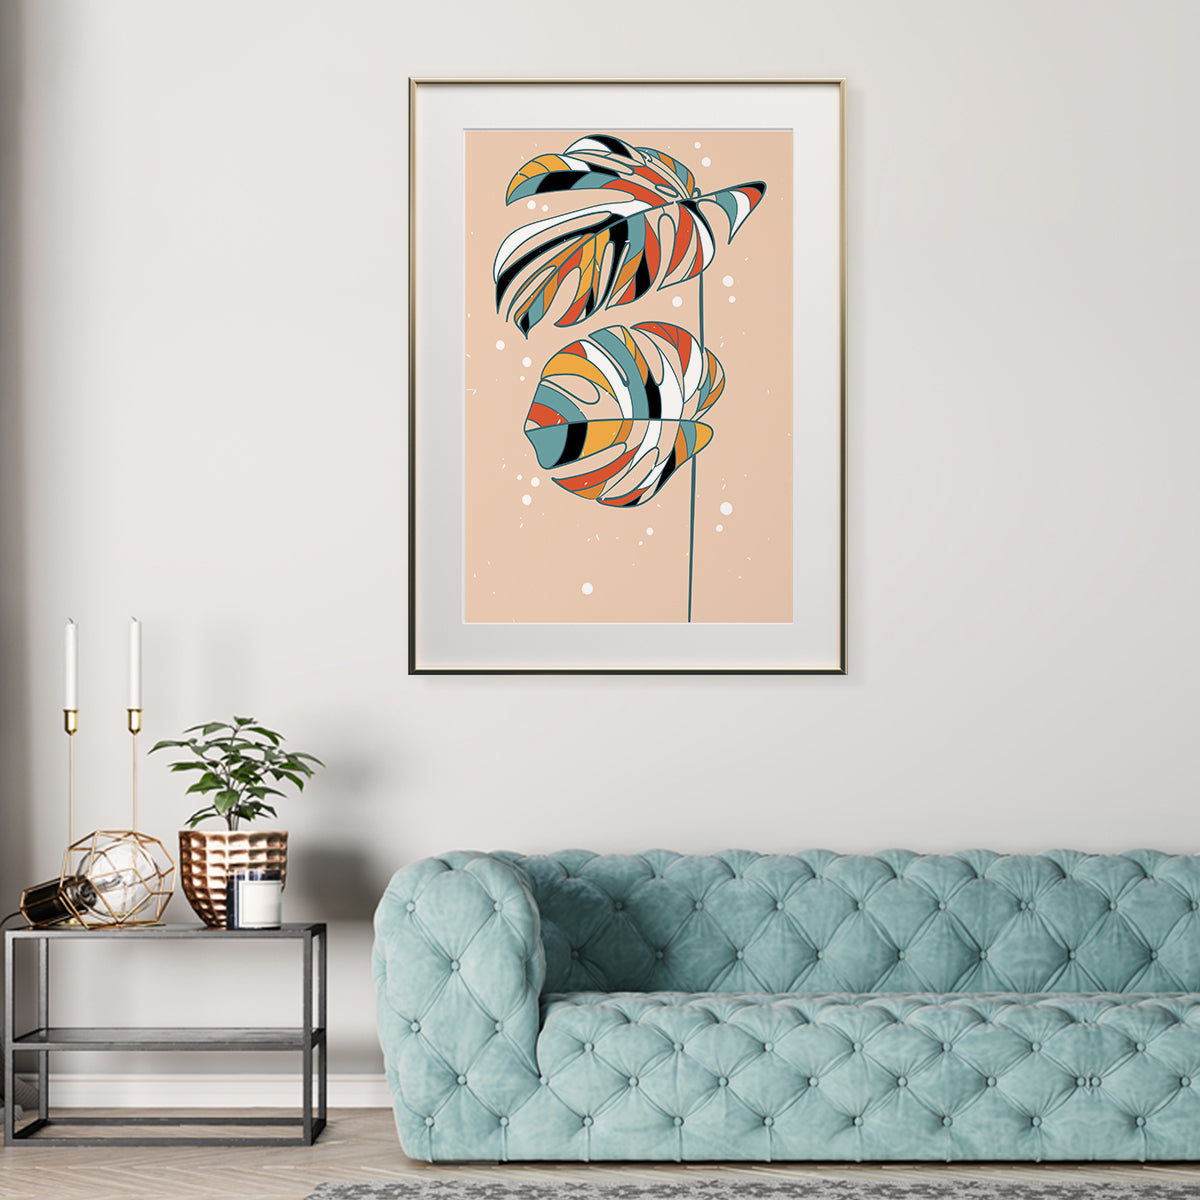 Colorful Abstract Minimalistic Monstera Posters Wall Art Prints-Vertical Posters NOT FRAMED-CetArt-8″x10″ inches-CetArt